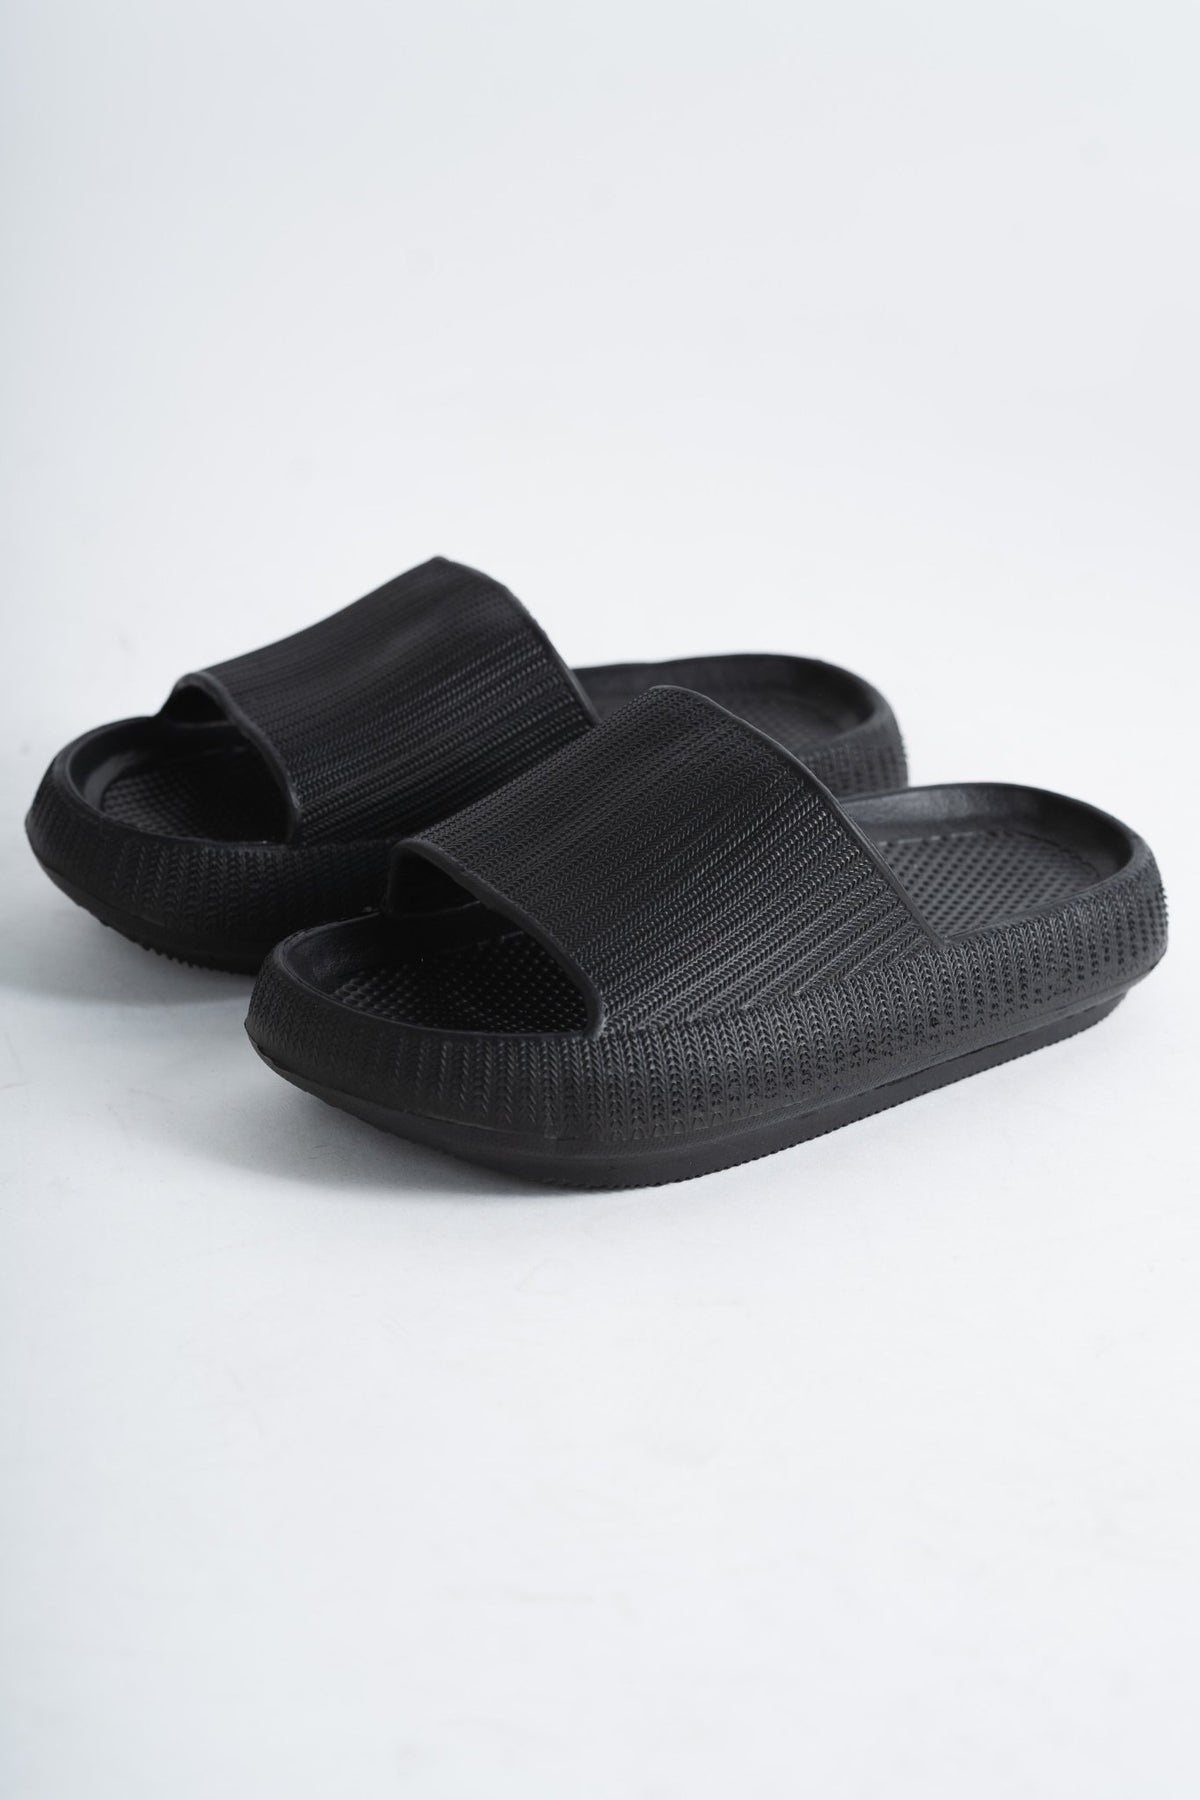 Eva pillow slides black - Trendy shoes - Cute Vacation Collection at Lush Fashion Lounge Boutique in Oklahoma City